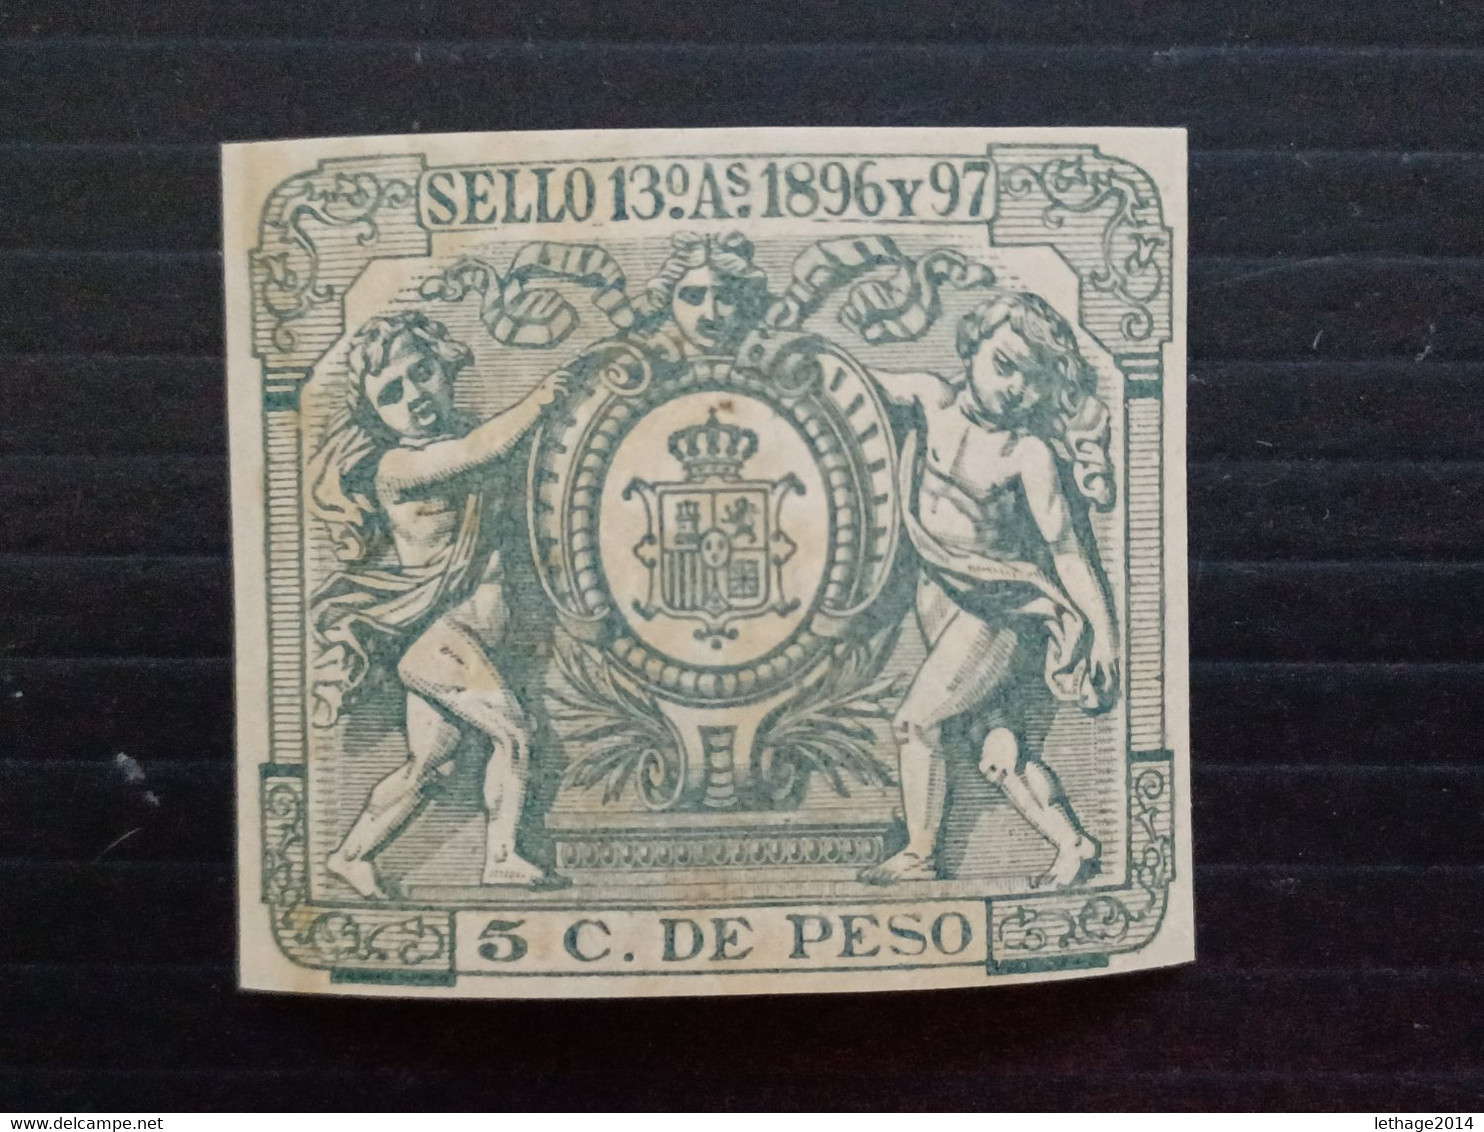 STAMPS CUBA 1896 FISCAL MARITIME NAVAL COMMERCIAL EXCHANGE TAXES VERY RARE MNH ORIGINAL - Postage Due